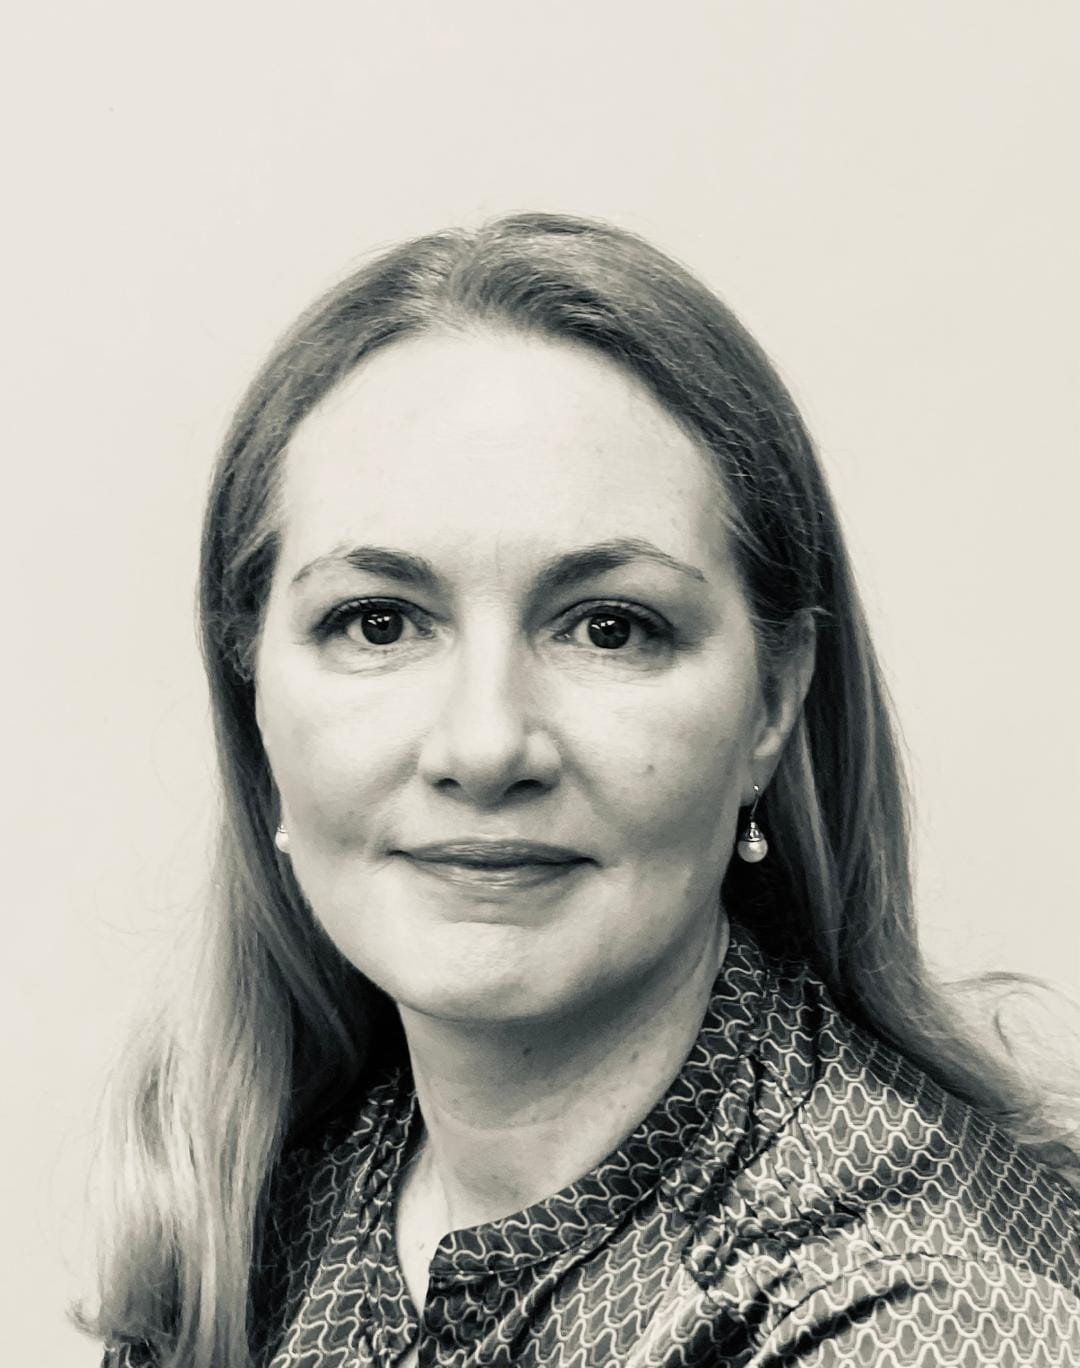 Profile picture of Evelyn Healy, VP of Human Resources at NTT DATA UK